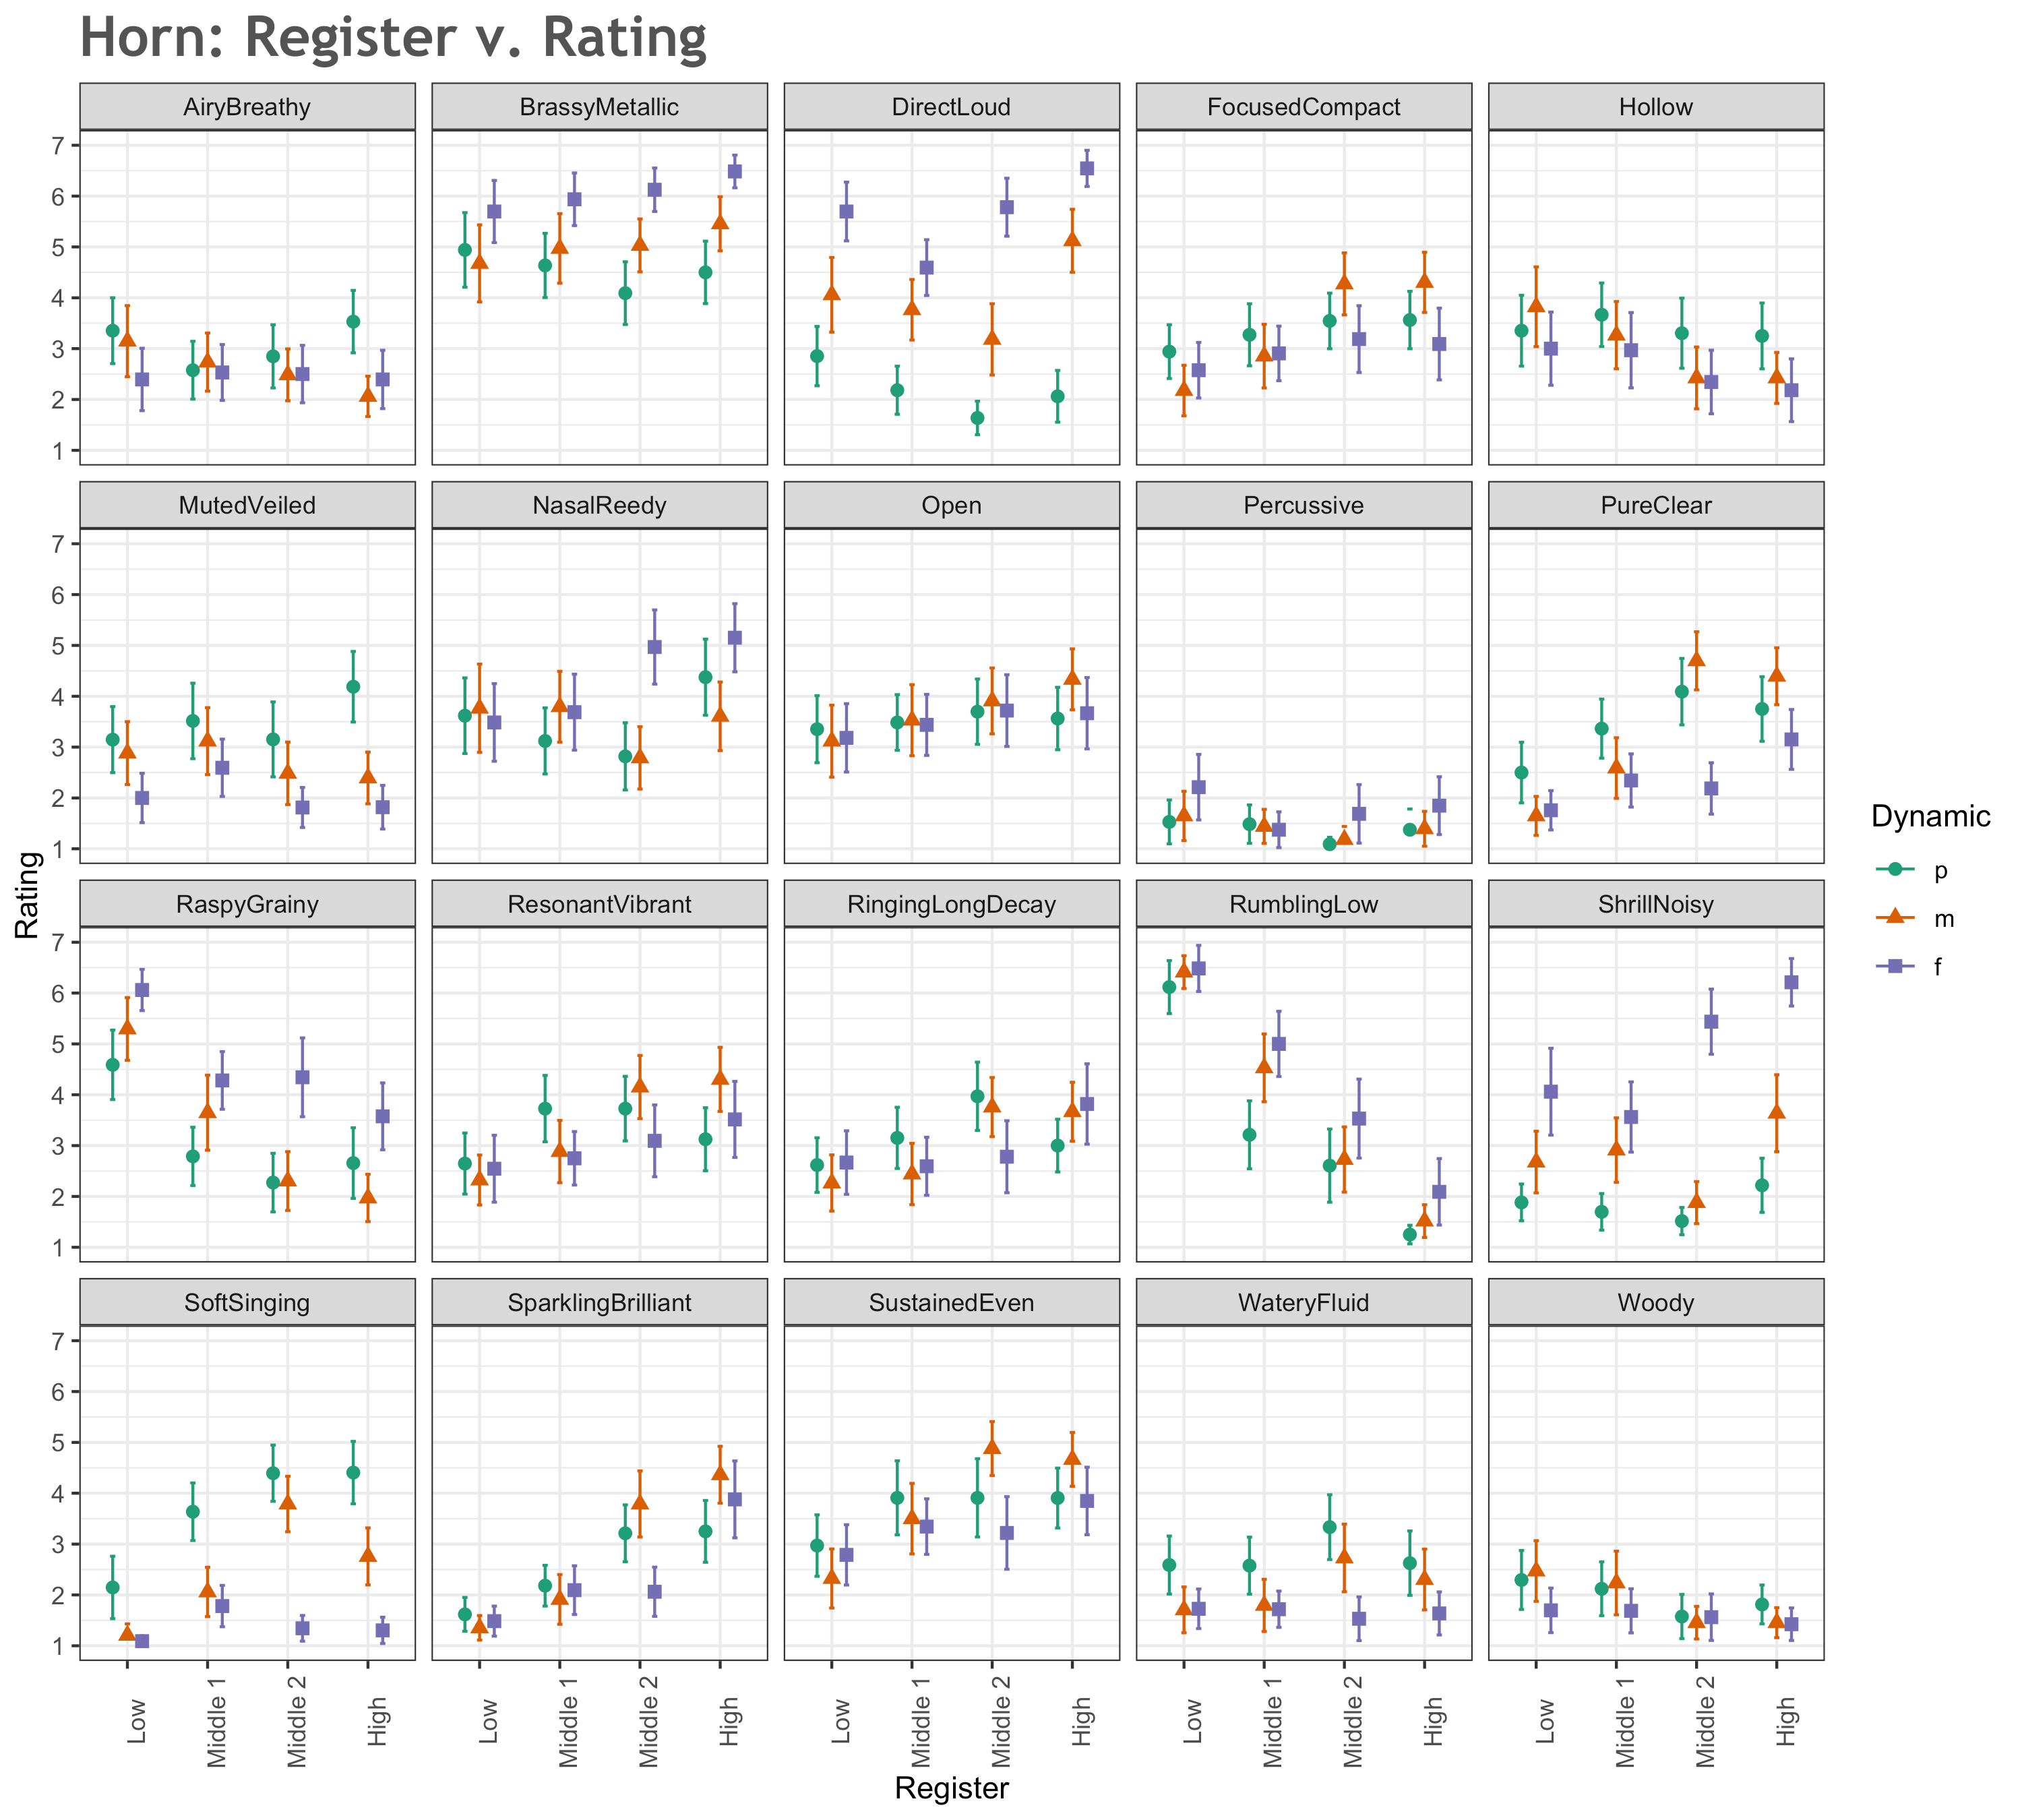 20 small graphs of the qualia variation by register for the french horn. The x-axis is the register and each graph is labelled with low, middle 1, middle 2, and high. The y-axis is the rating spanning 1-7. Each graph has several data points with vertical lines going through them. These vertical lines differ in length. Each data point is color coded by dynamic, with the dynamics being p, m, and f. The graphs are titled as follows: AiryBreathy, BrassyMetallic, DirectLoud, FocusedCompact, Hollow, MutedVeiled, NasalReedy, Open, Percussive, PureClear, RaspyGrainy, ResonantVibrant, RingingLongDecay, RumblingLow, ShrillNoisy, SoftSinging, SparklingBrilliant, SustainedEven, WateryFluid, and Woody. More description below. 